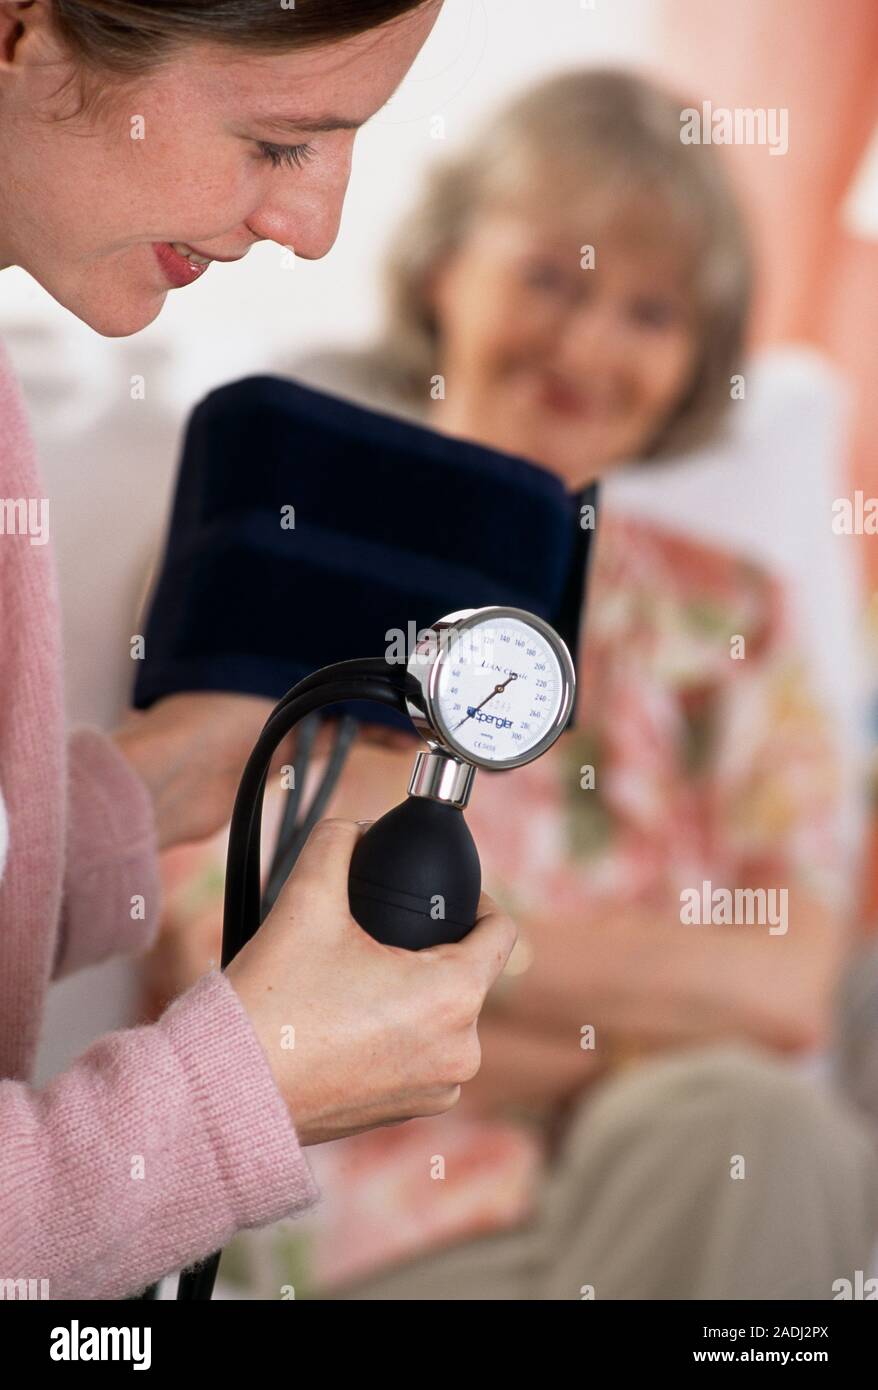 Blood pressure gauge. Woman holding a sphygmomanometer, an instrument used  to measure blood pressure. The cuff (black) is placed on the upper arm of t  Stock Photo - Alamy